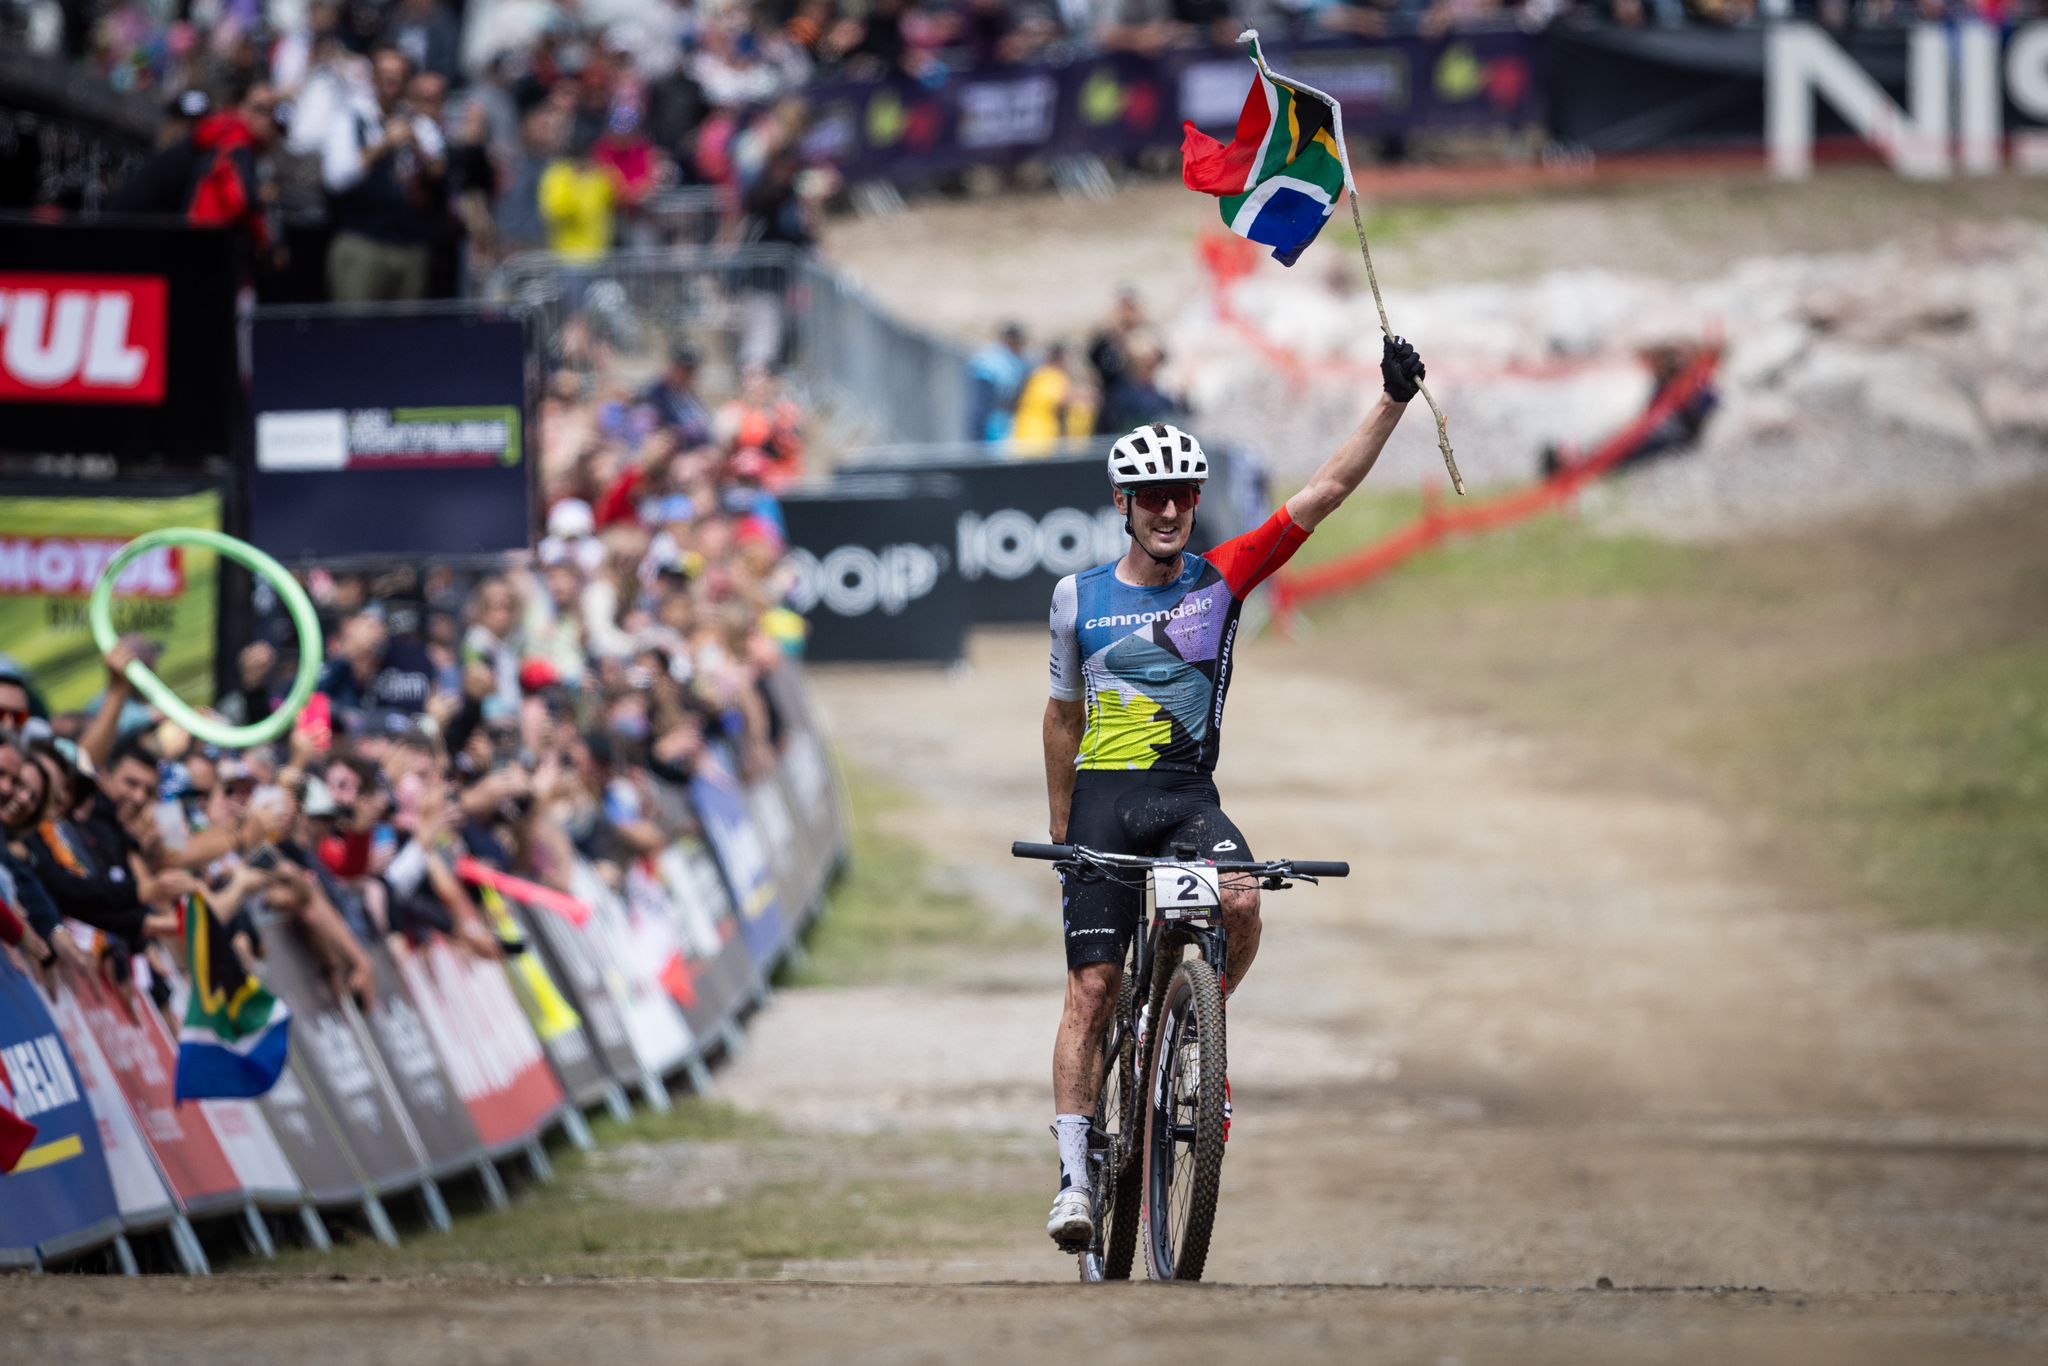 HATHERLY DOES THE CROSS-COUNTRY DOUBLE IN LES GETS AND PIETERSE PUTS ALL TO THE SWORD IN LAST  UCI WORLD CUP BEFORE PARIS 2024